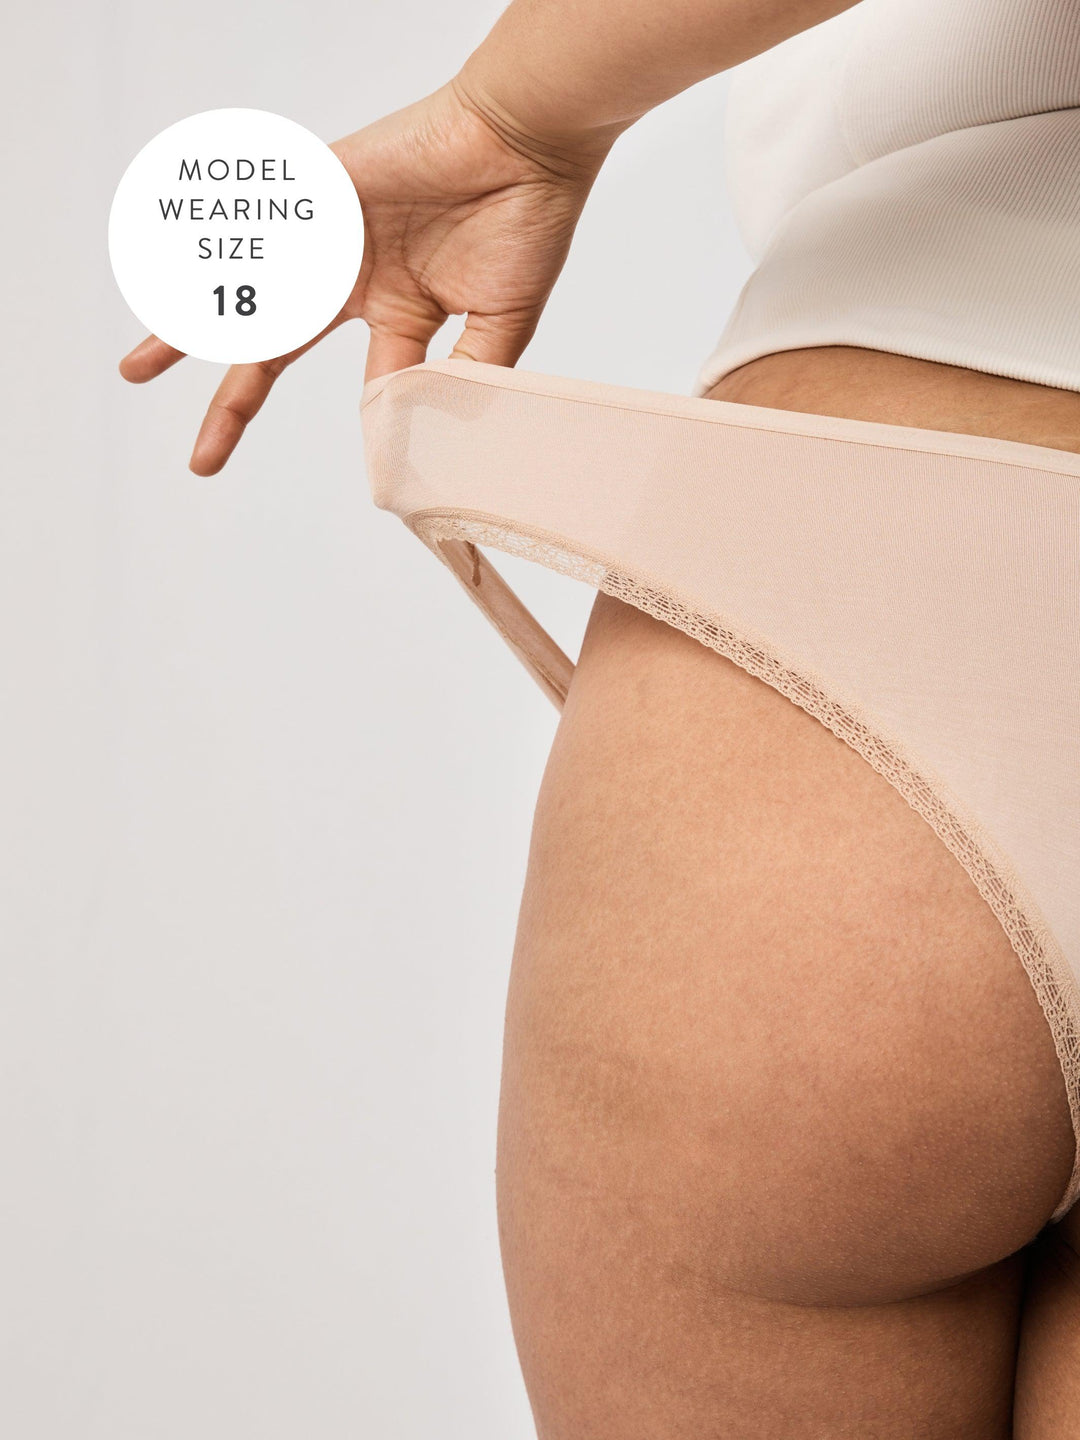 Why is bamboo underwear better for your vagina than cotton